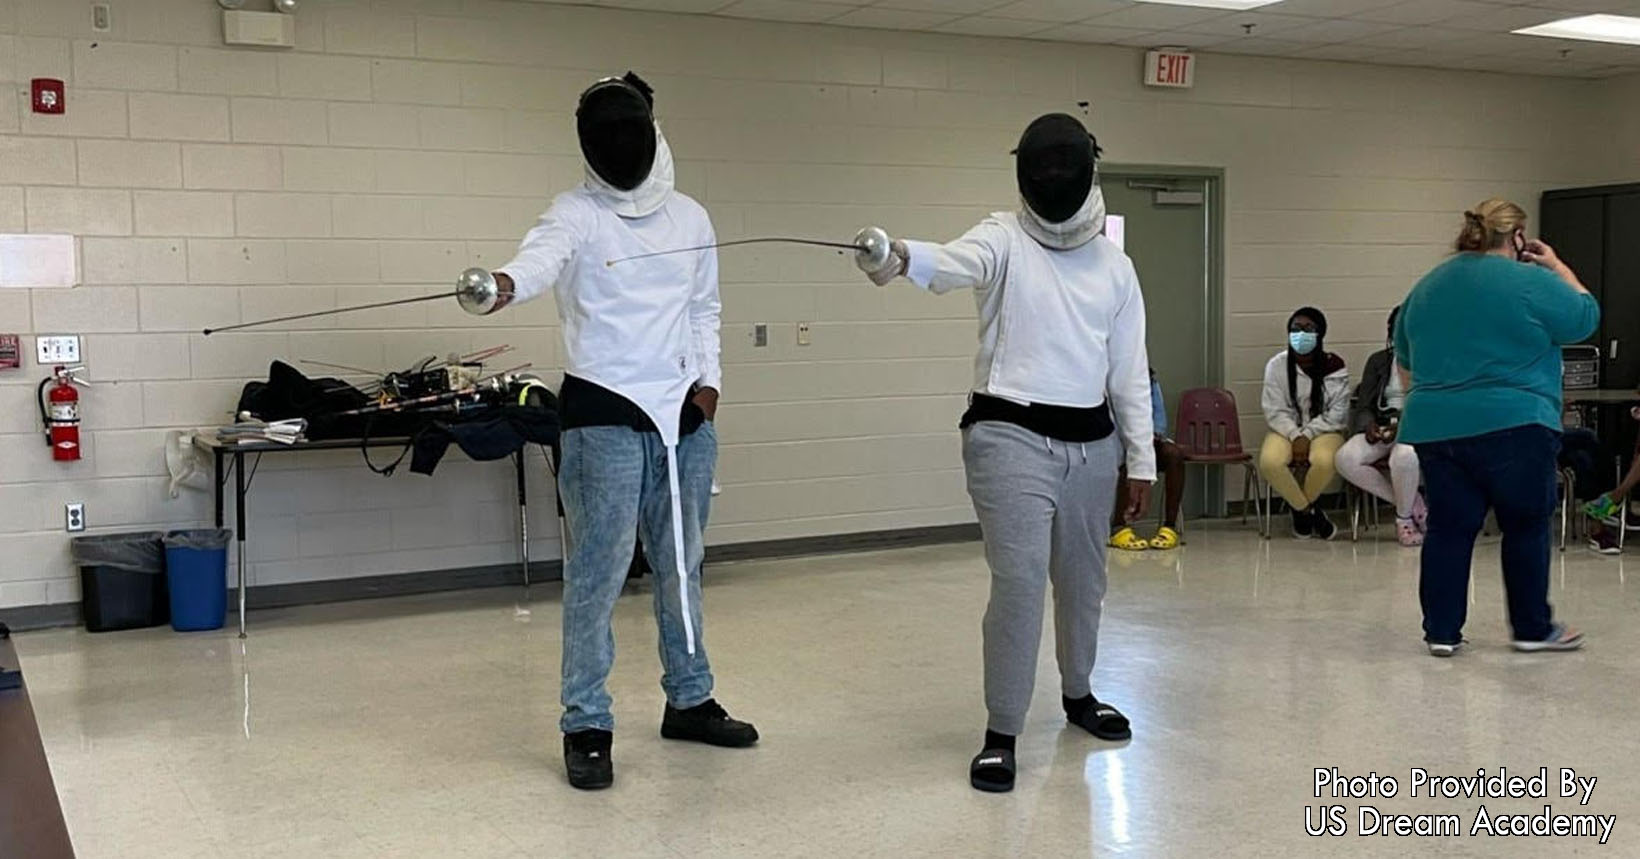 Two students learning fencing.